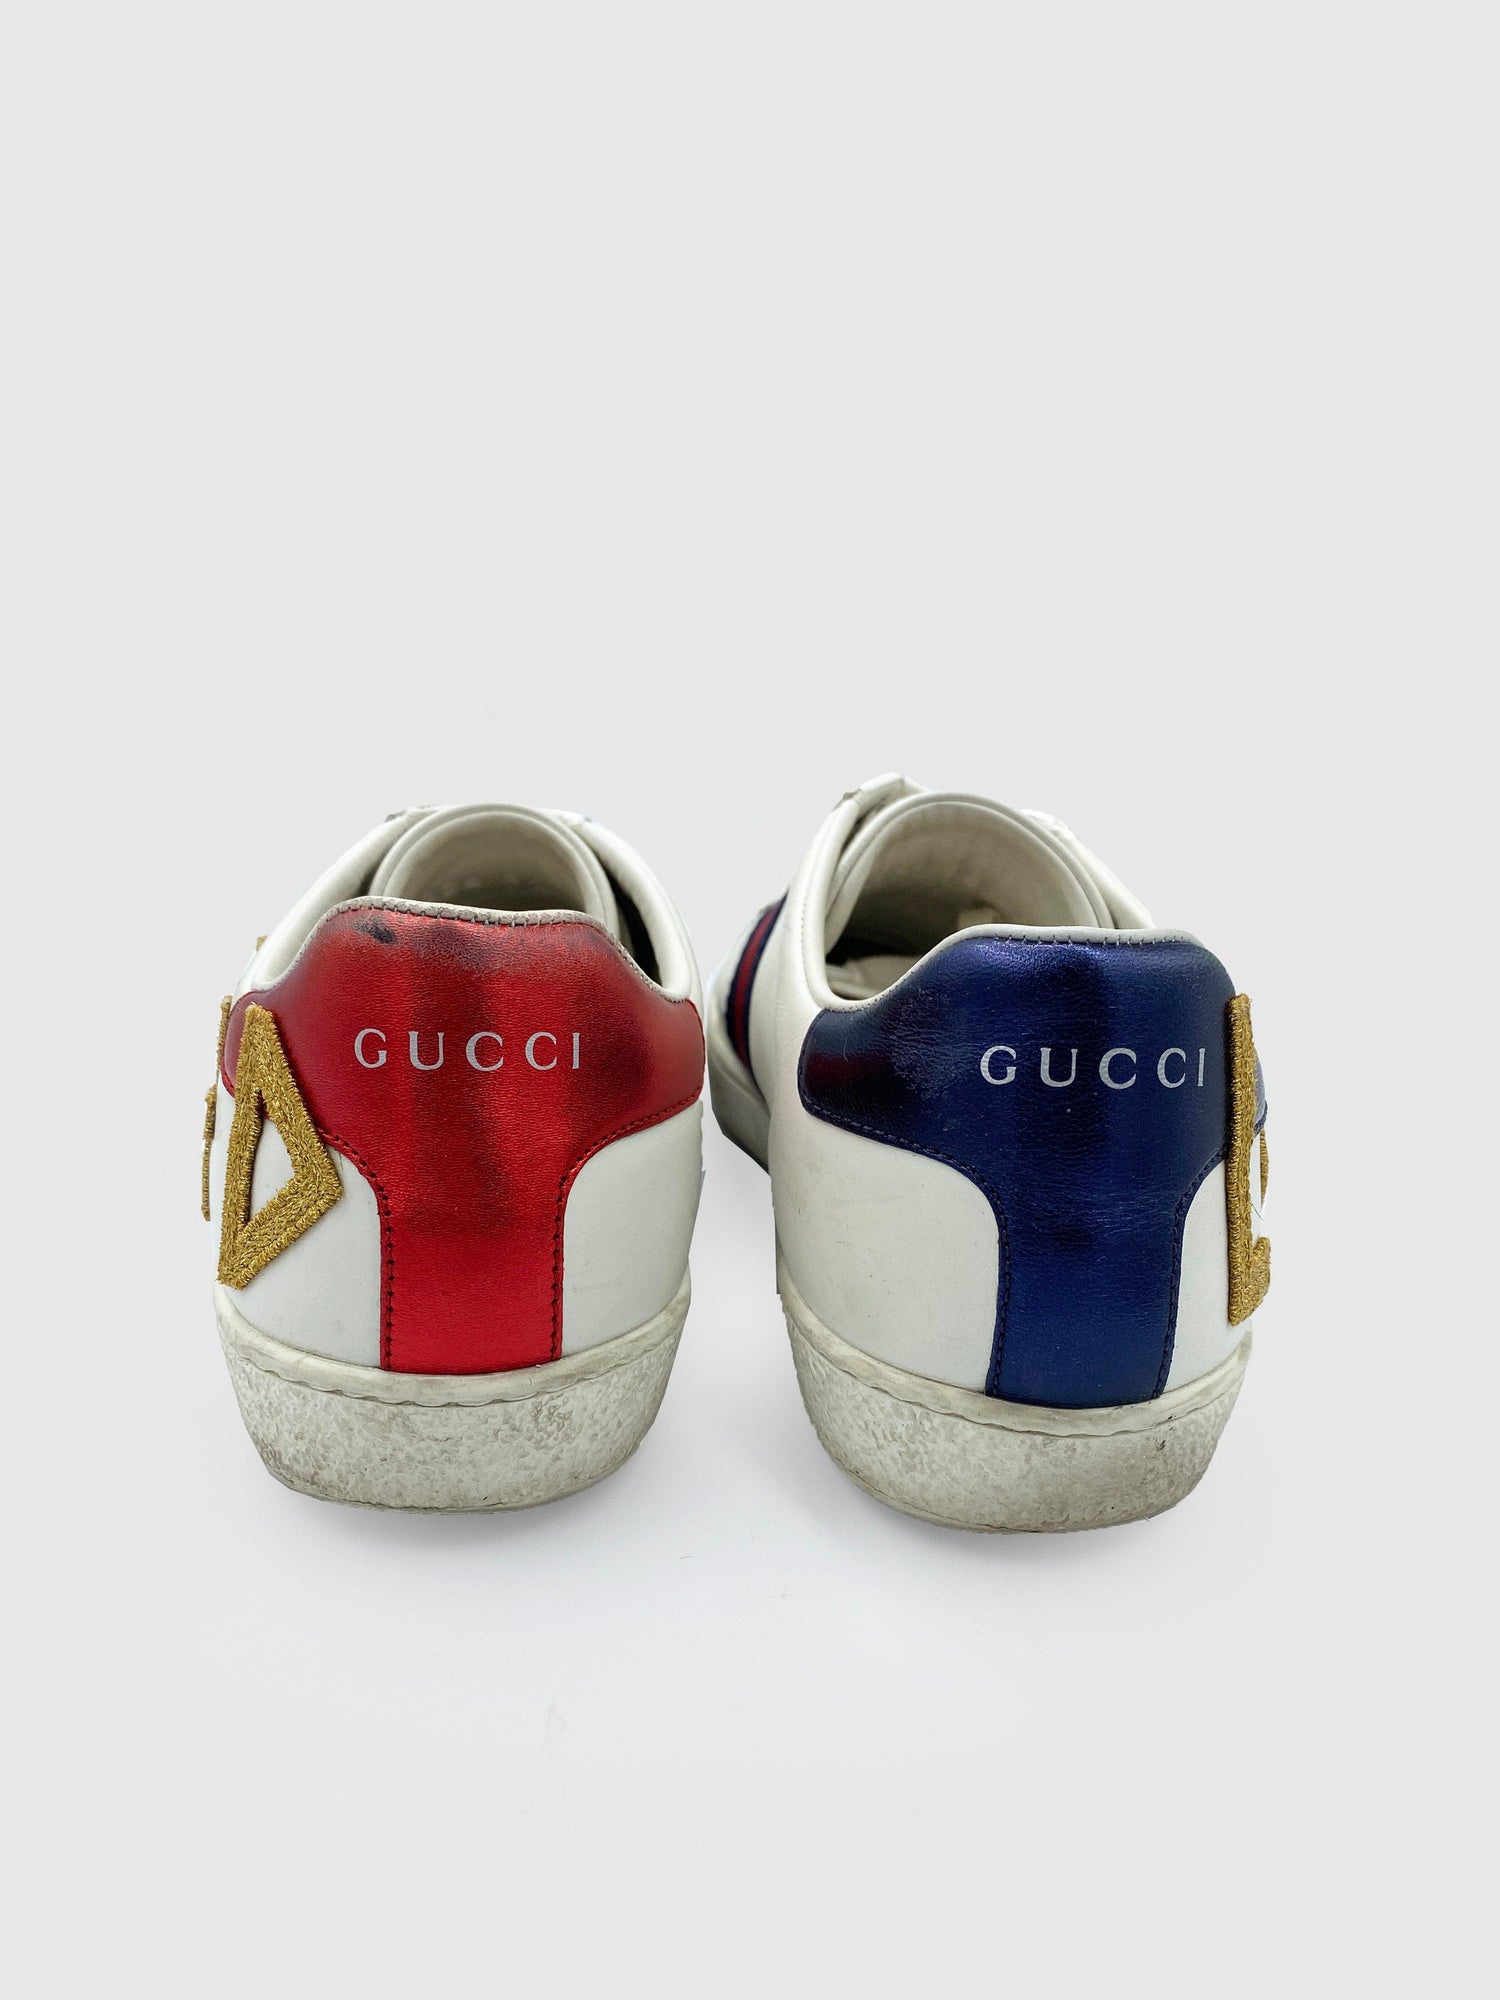 Gucci Ace Loved Sneaker - Size 38 - Second Nature Boutique